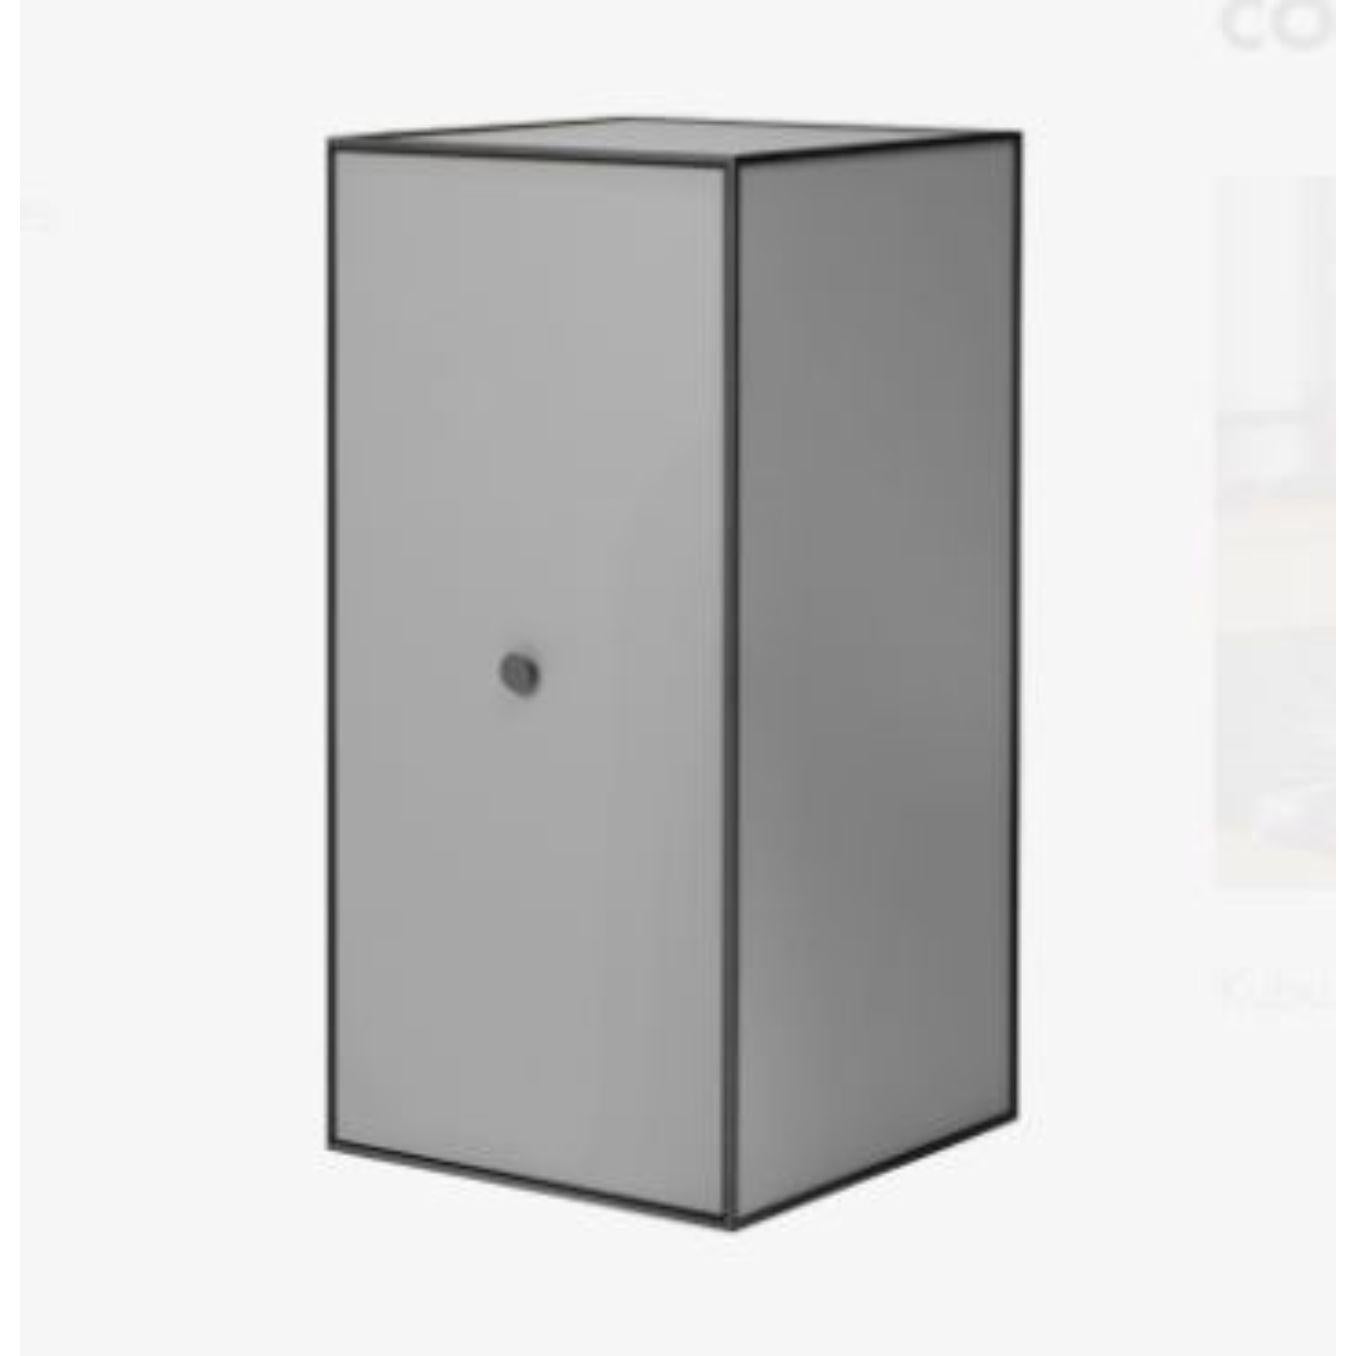 70 dark grey frame box with 2 shelves / door by Lassen
Dimensions: D 35 x W 35 x H 70 cm 
Materials: Finér, melamin, melamin, melamine, metal, veneer
Also available in different colours and dimensions. 
Weight: 13 kg


By Lassen is a Danish